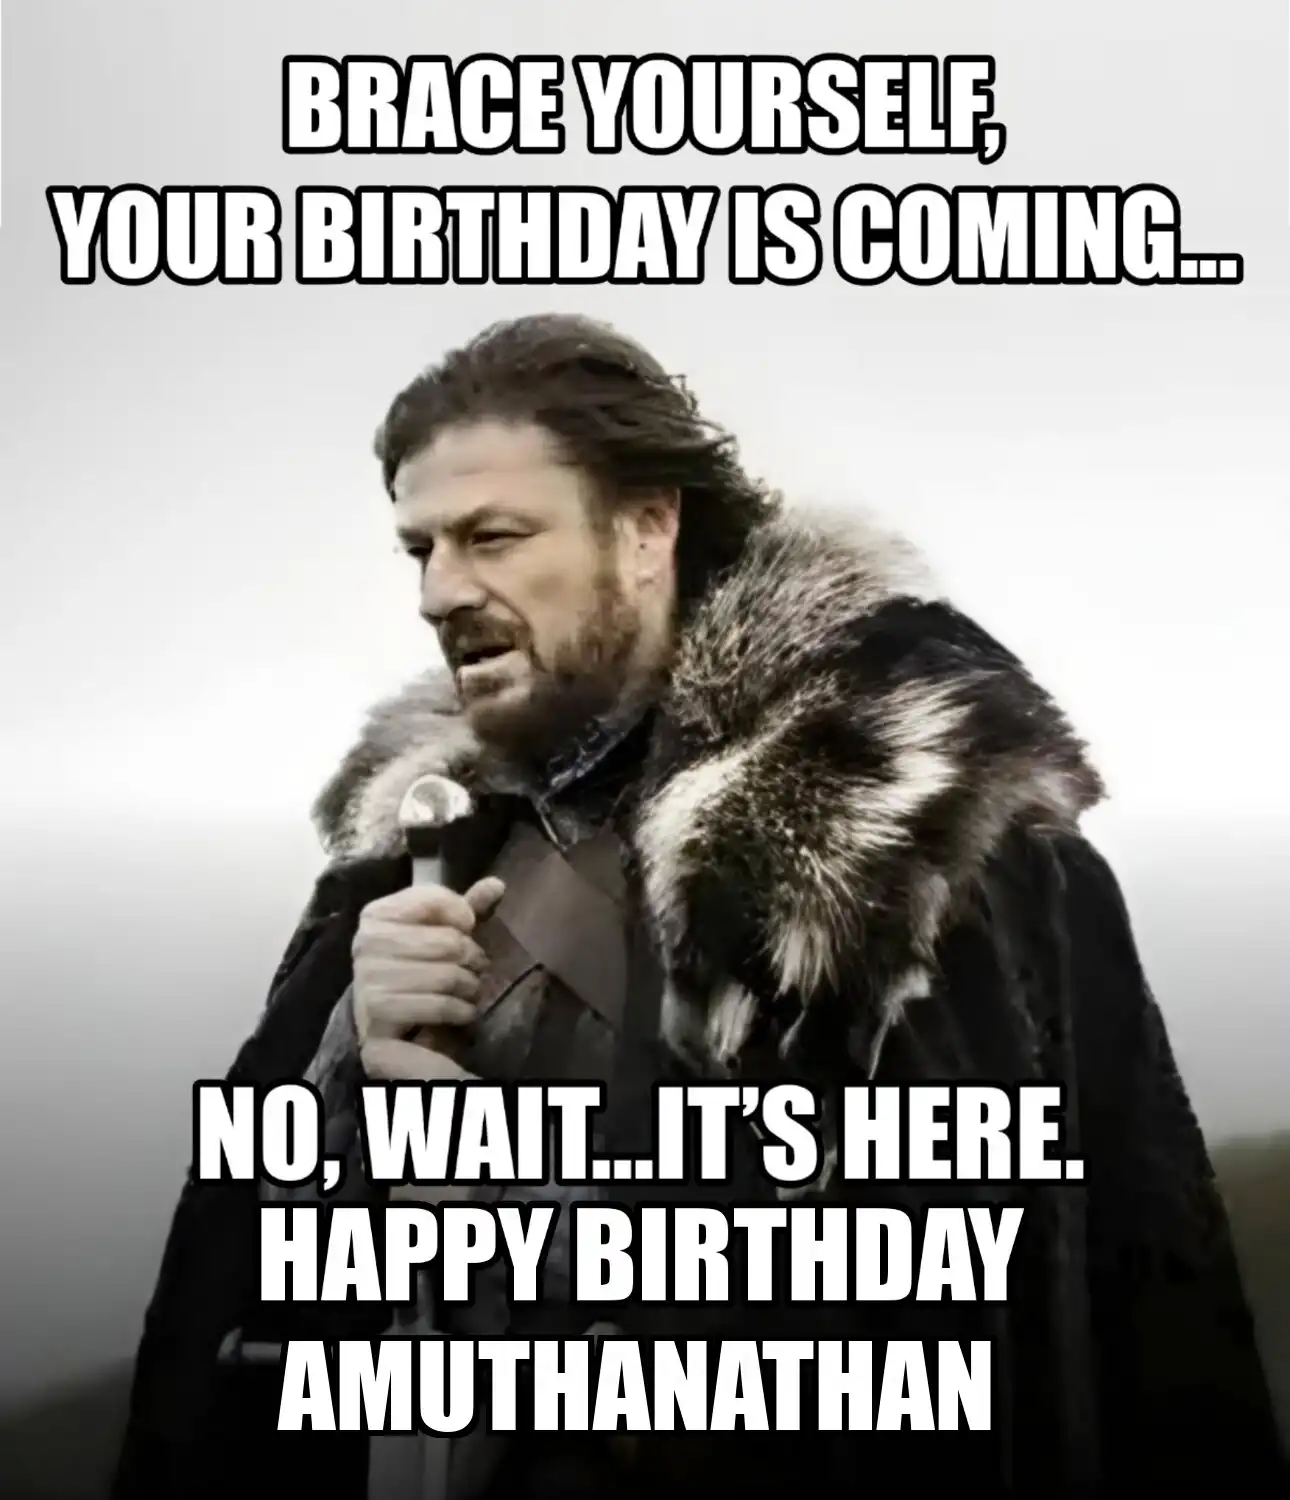 Happy Birthday Amuthanathan Brace Yourself Your Birthday Is Coming Meme